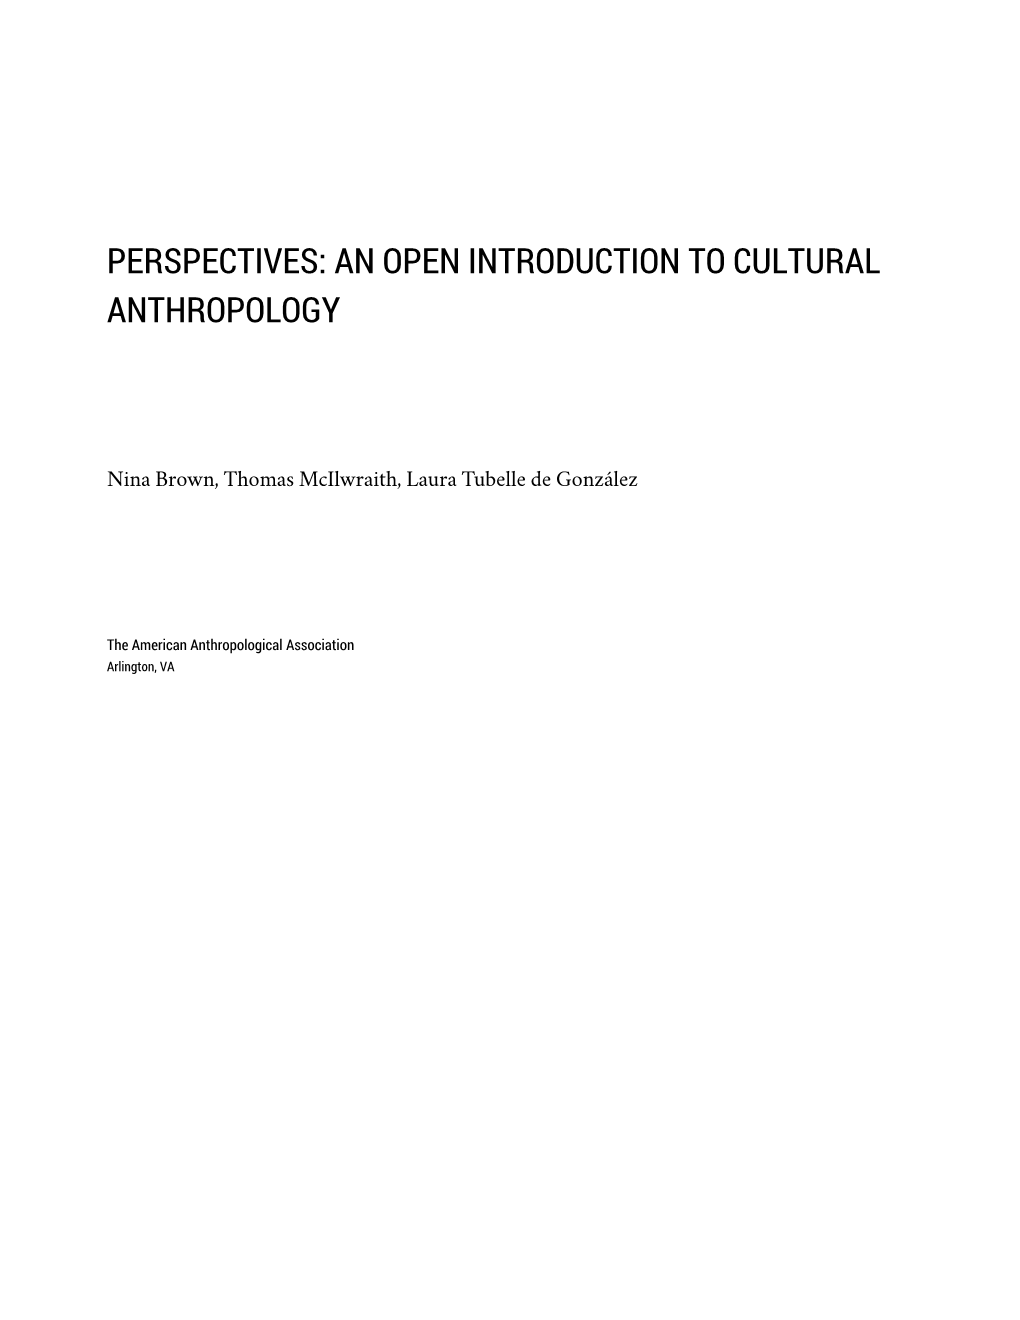 Perspectives: an Open Introduction to Cultural Anthropology